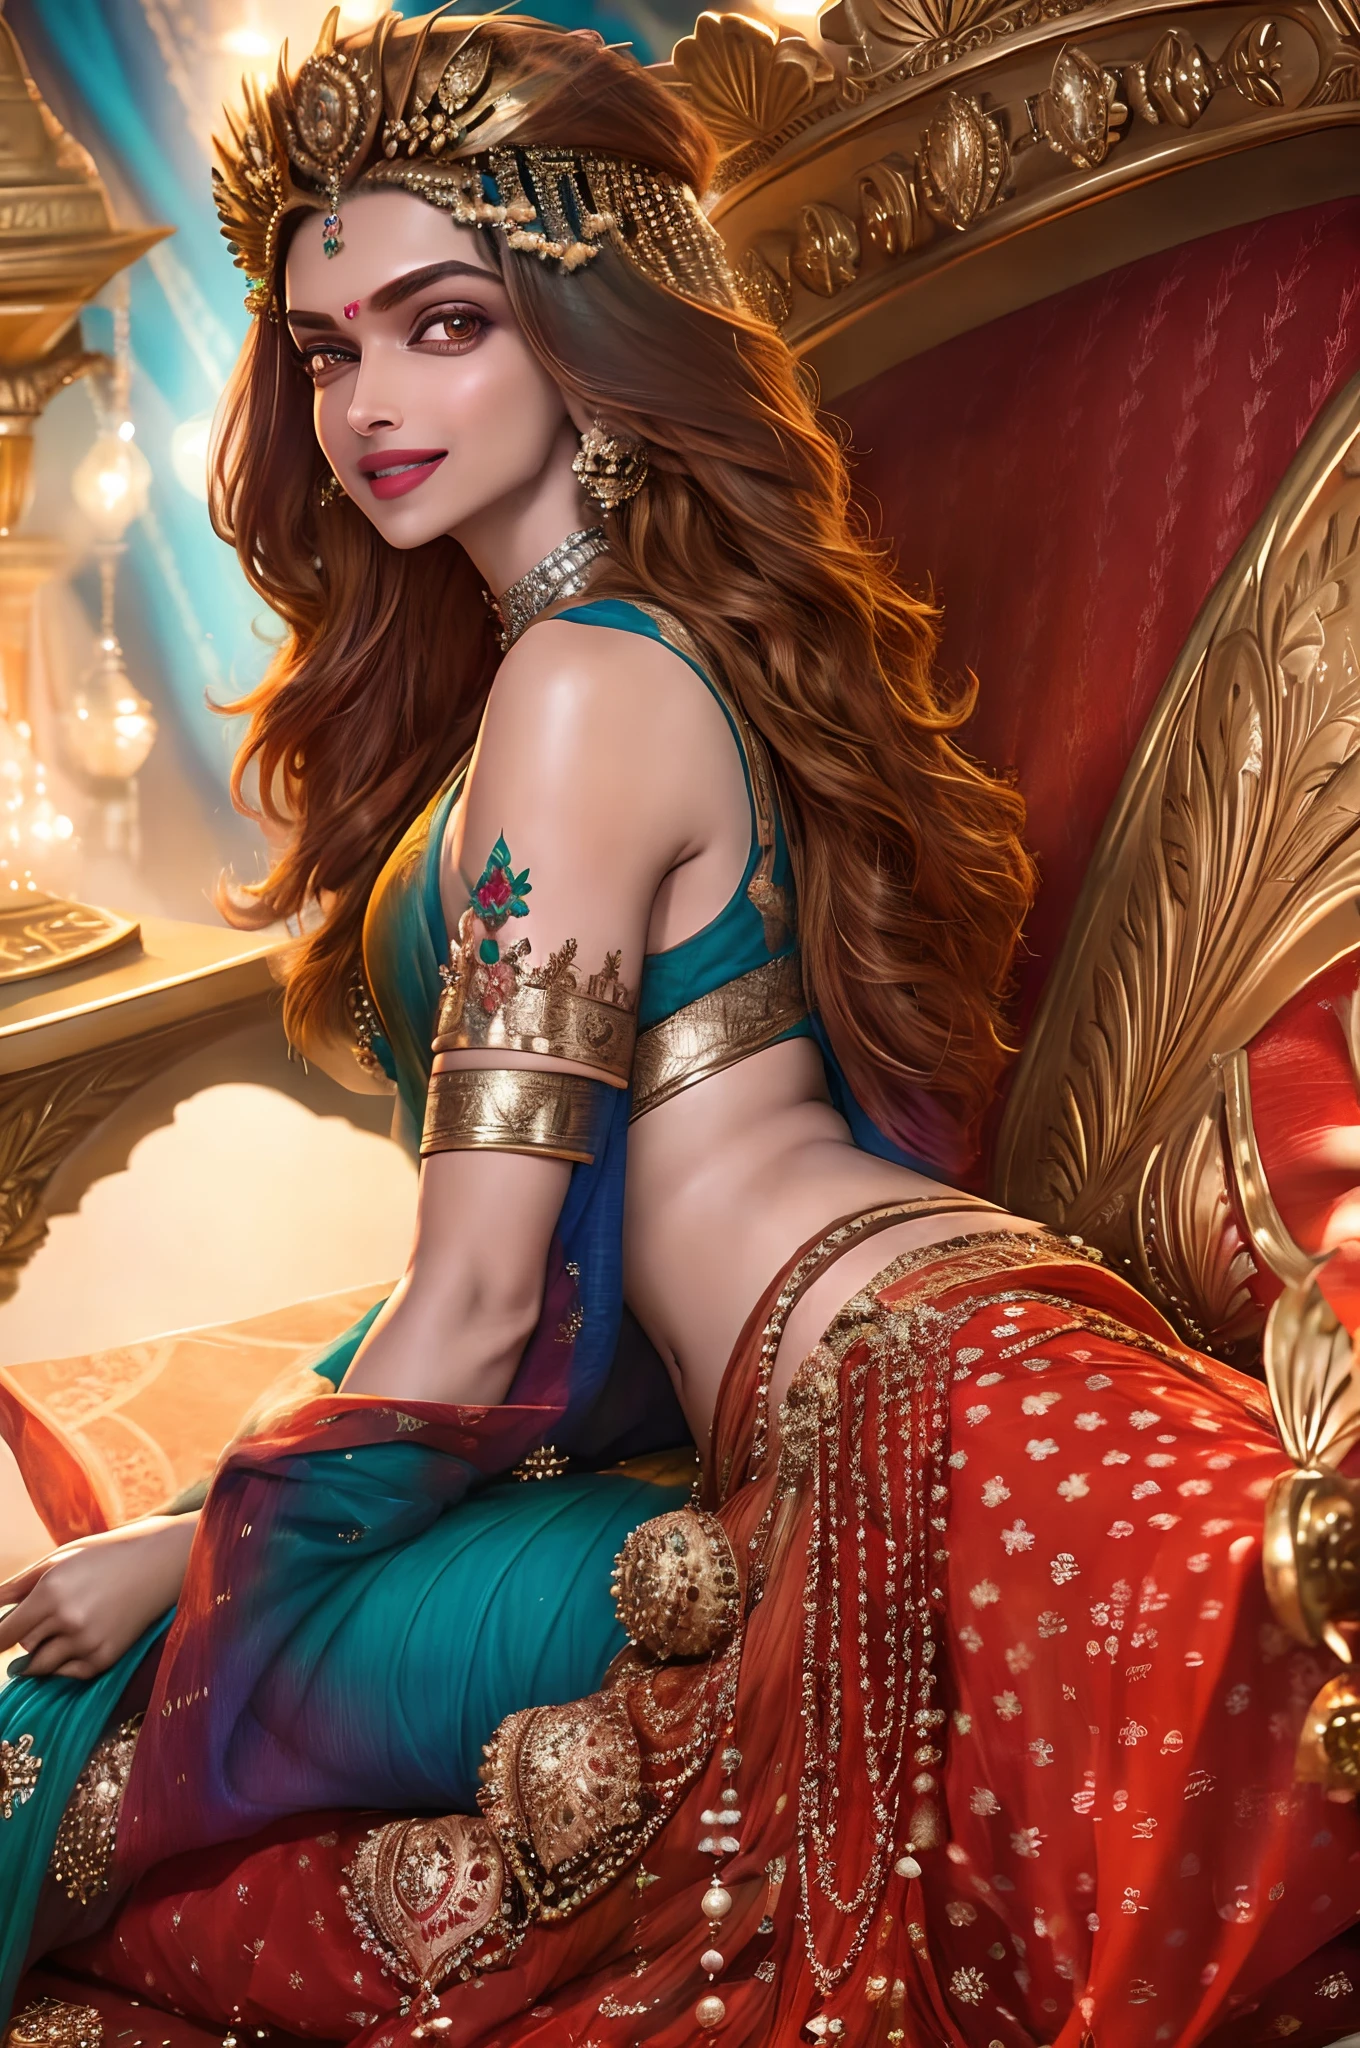 Indian actress Deepika Padukone wearing a vibrant saree lying in bed seductively, smiling